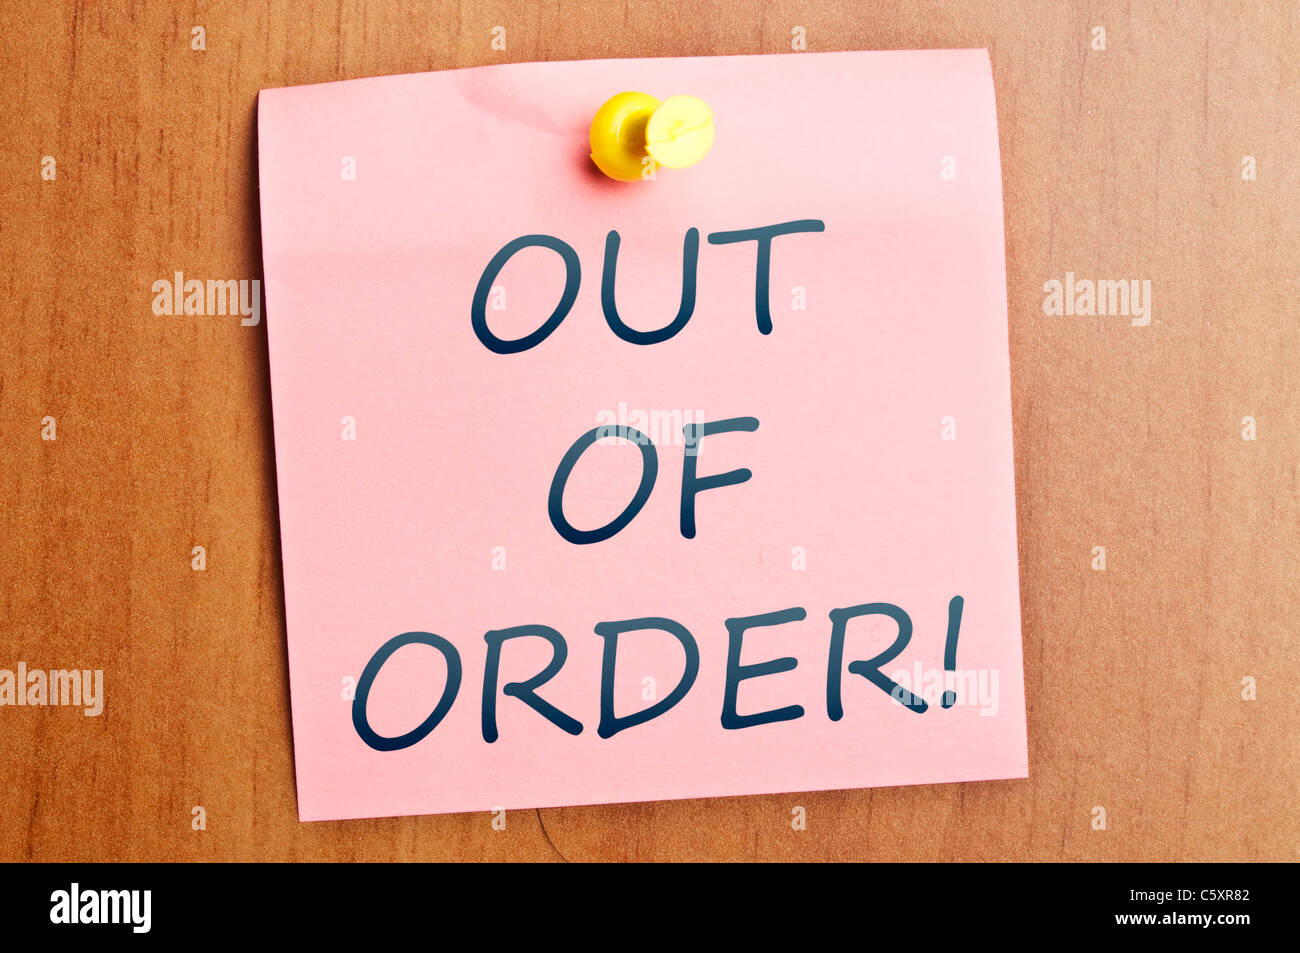 Out of order Stock Photo